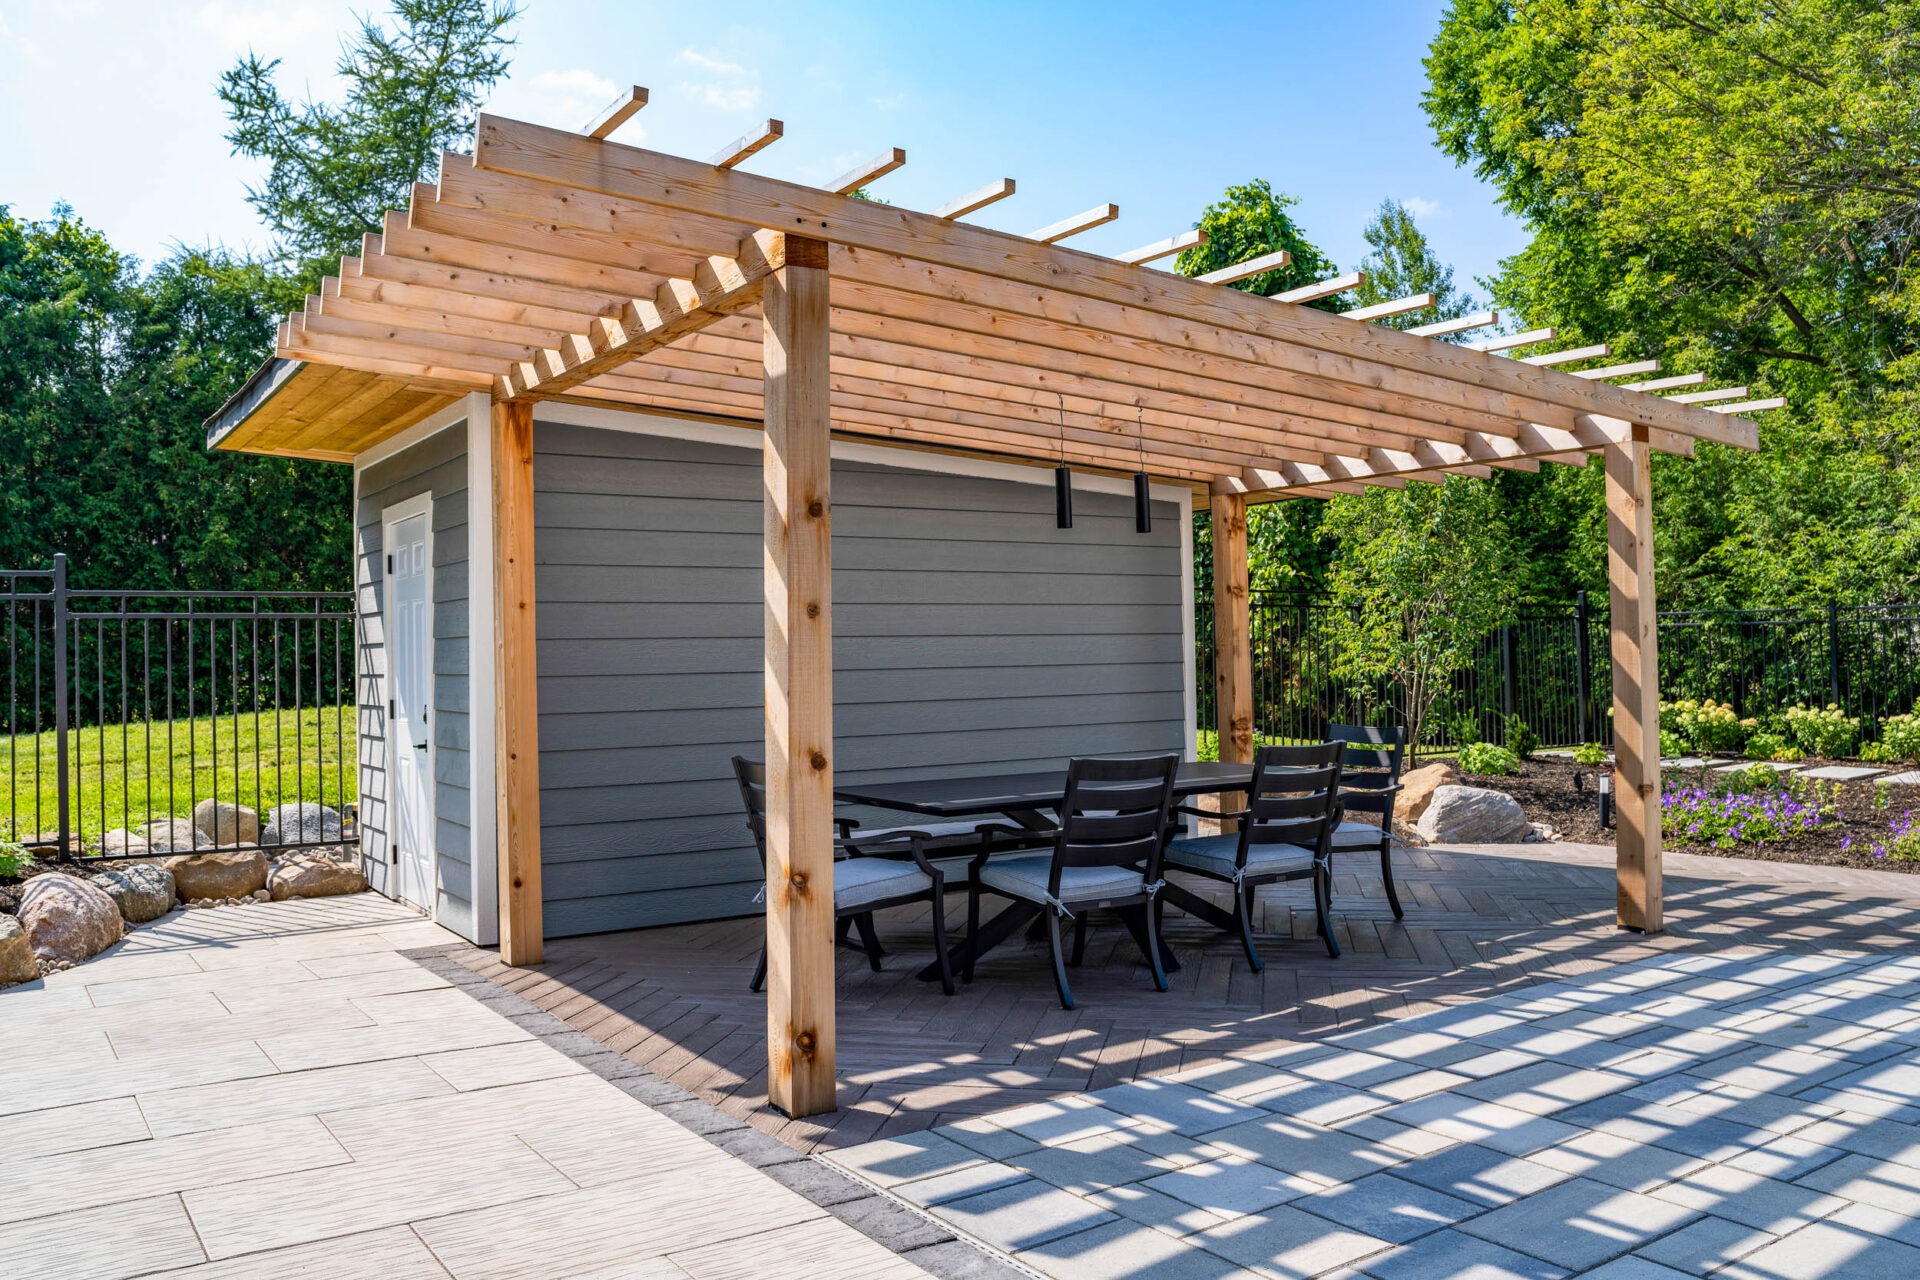 A wooden pergola with a partial lattice design extends over a paved patio with a dining set beside a grey shed, set against a landscaped garden and clear sky.